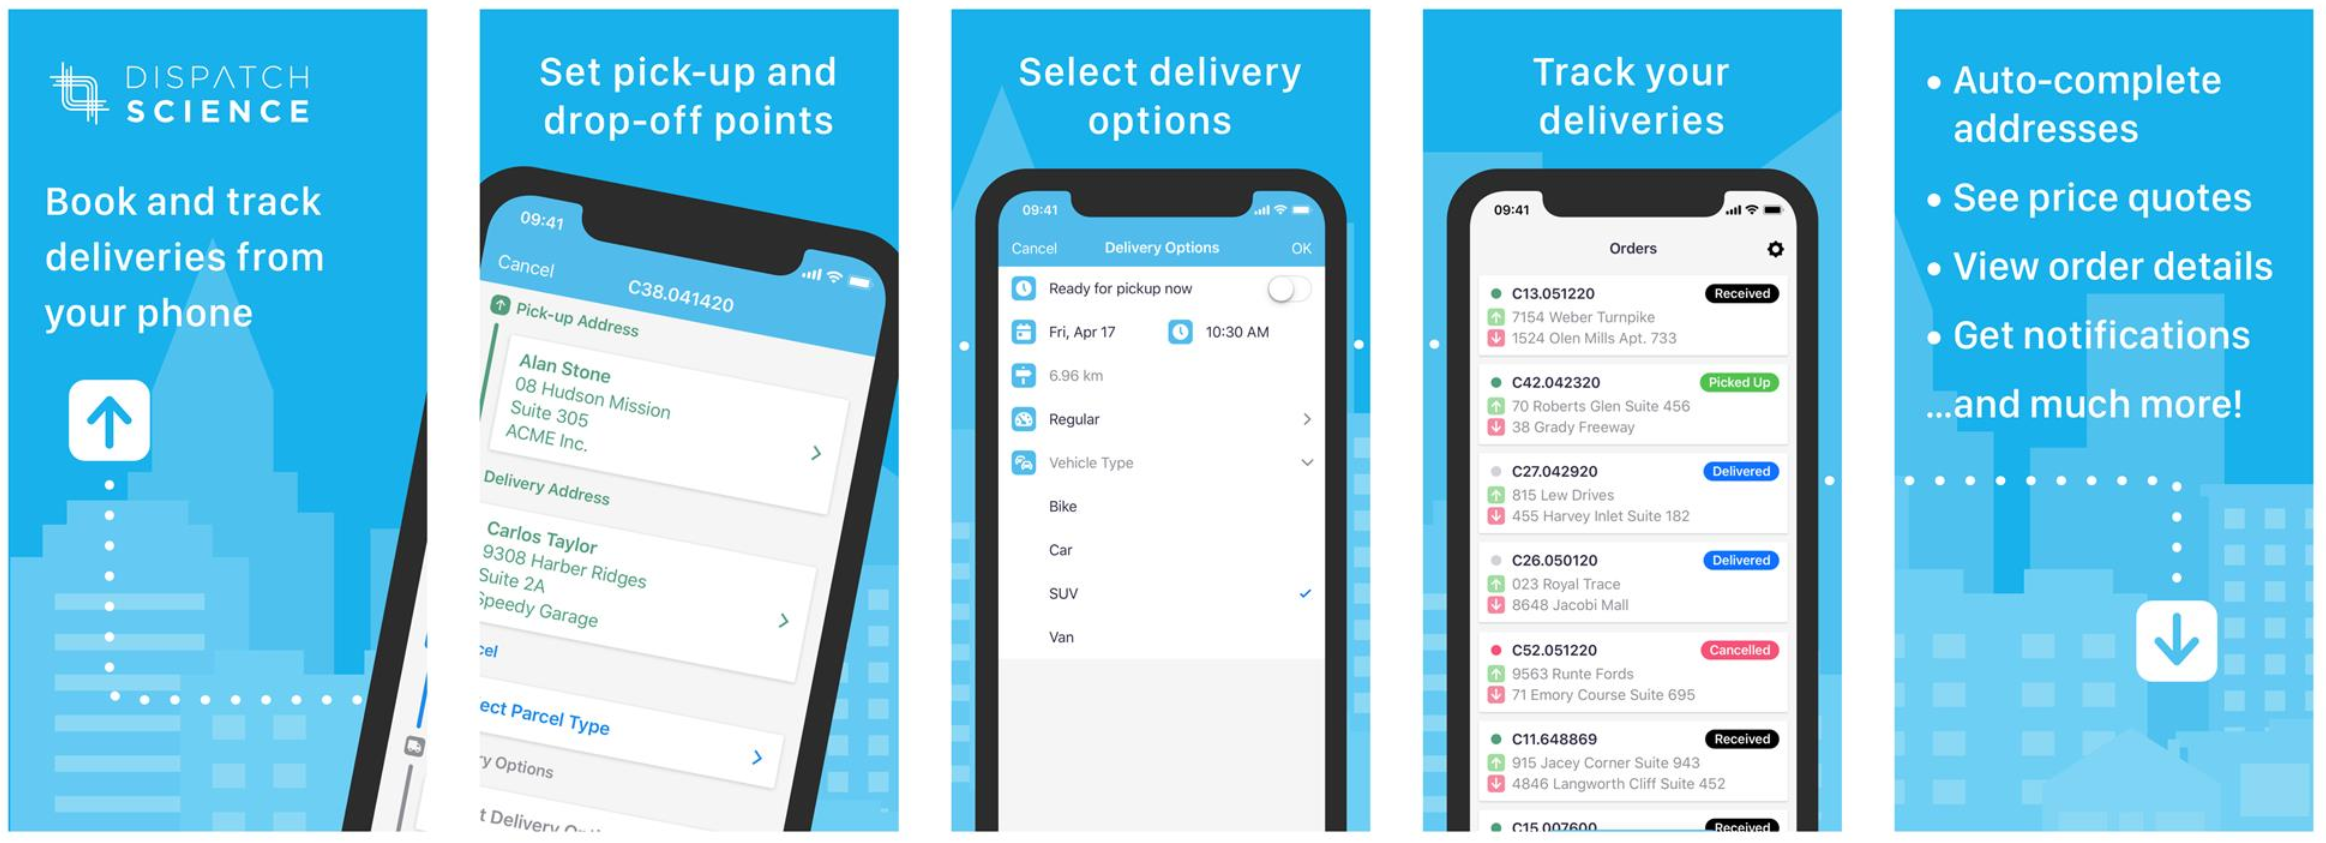 Dispatch Science Software - Customer mobile self-service order booking app